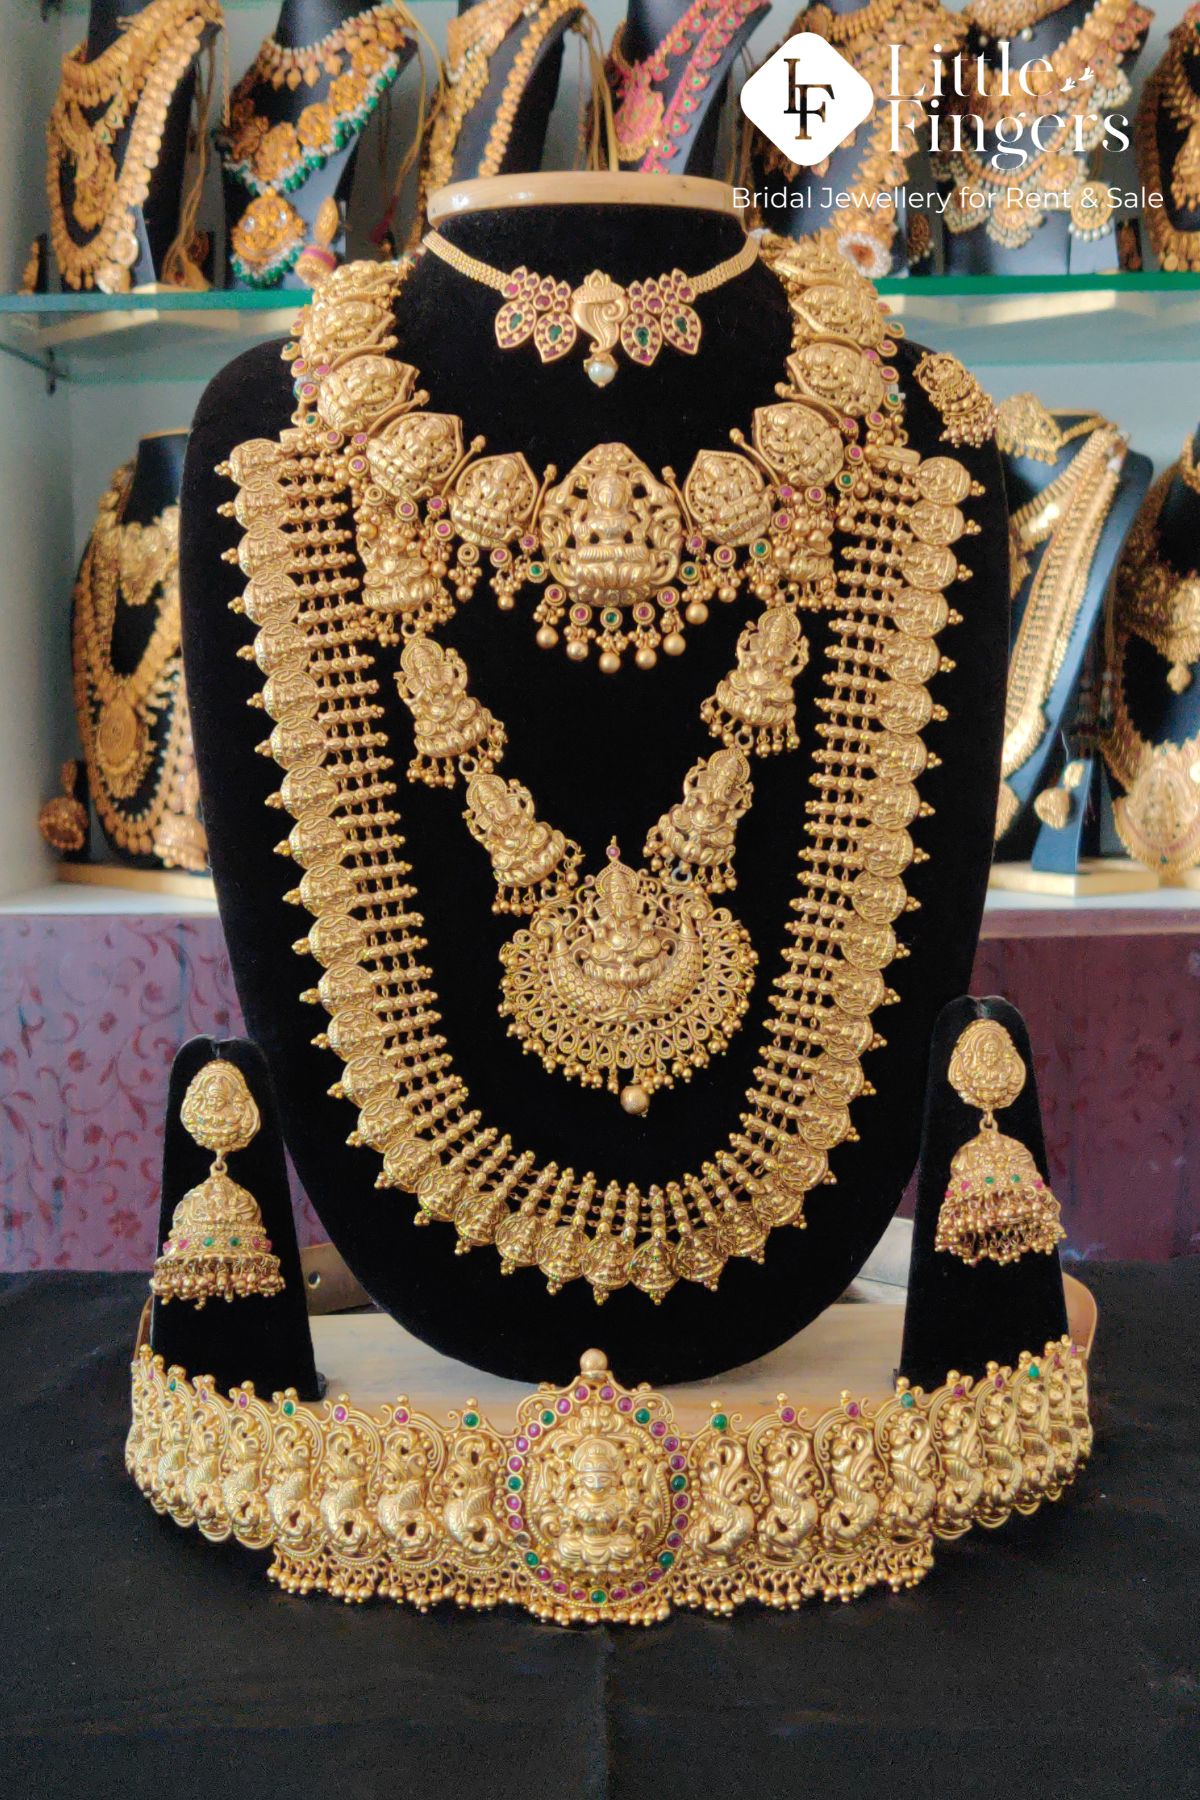 Antique Muhurtham Bridal Jewellery for rent online - Little Fingers India